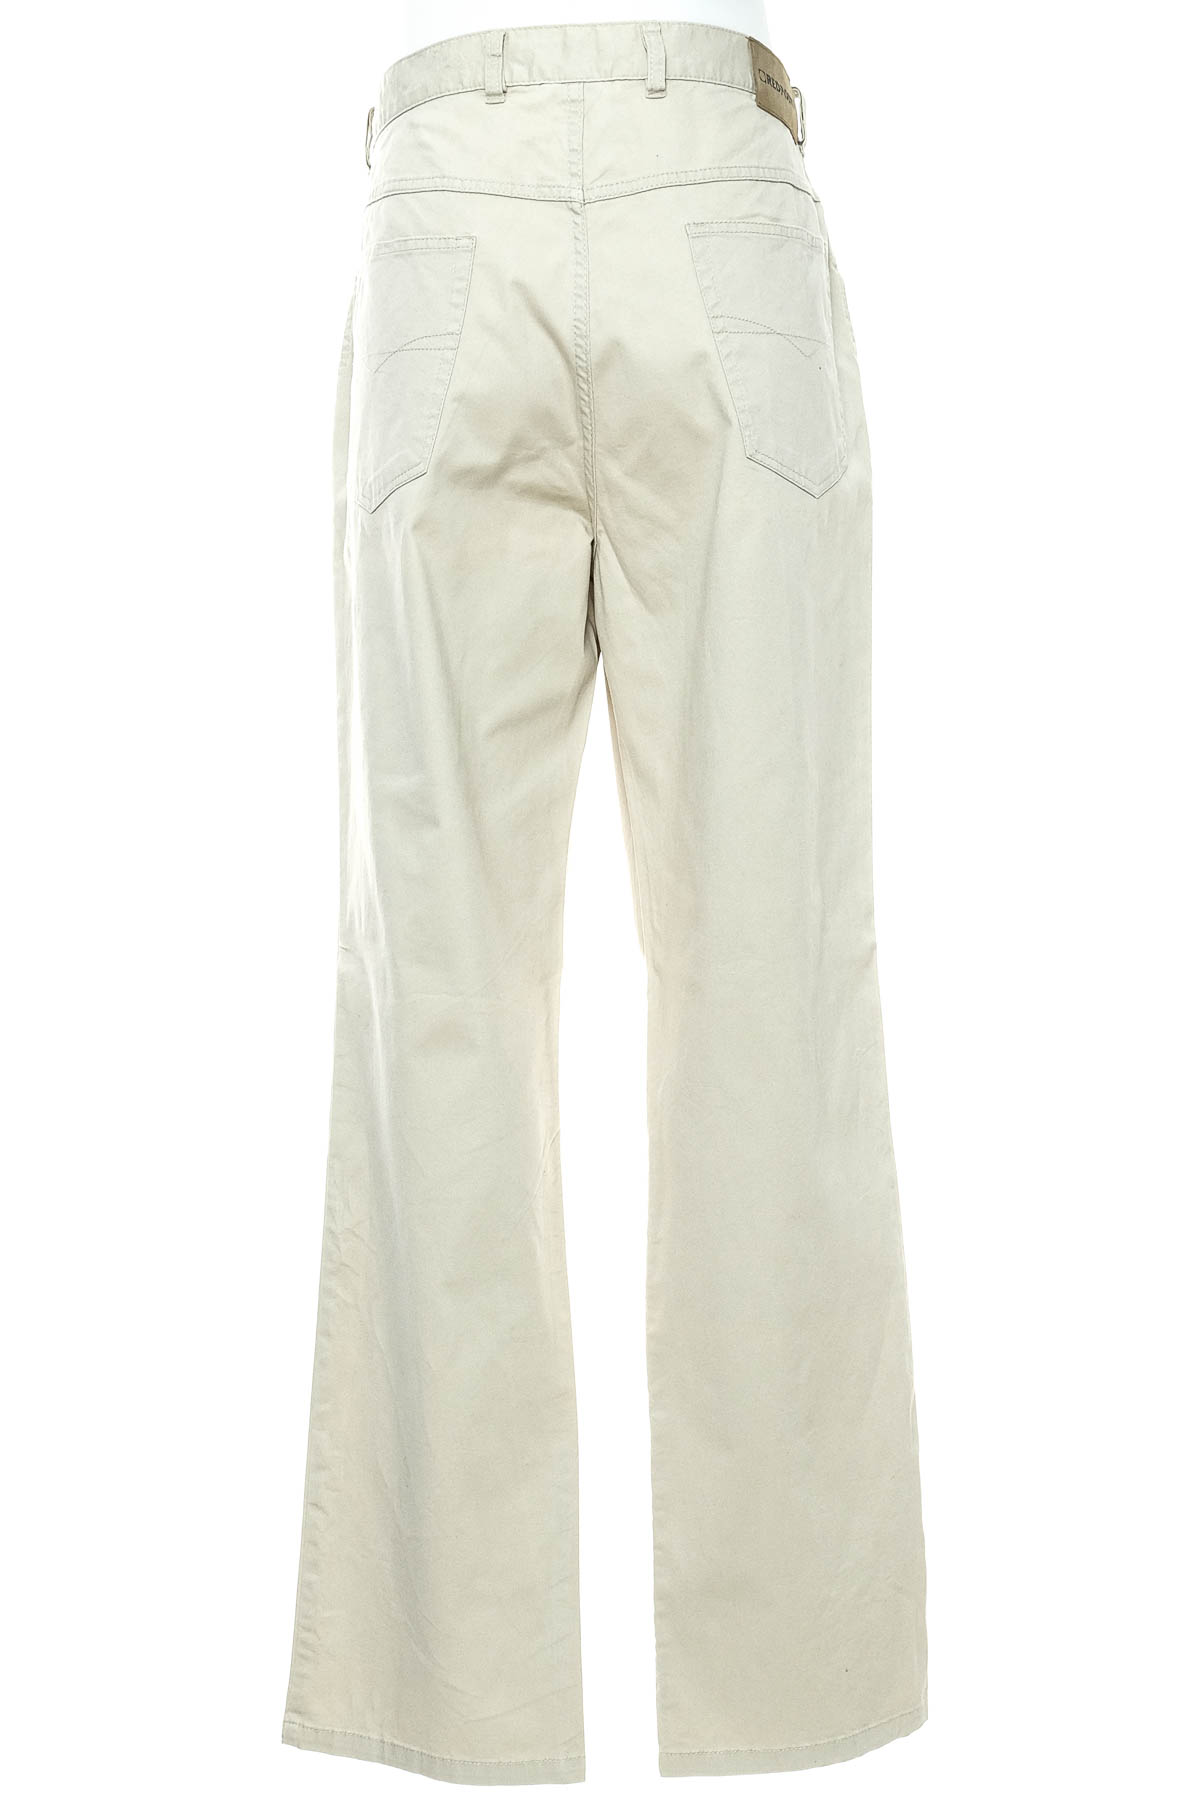 Men's trousers - Redpoint - 1